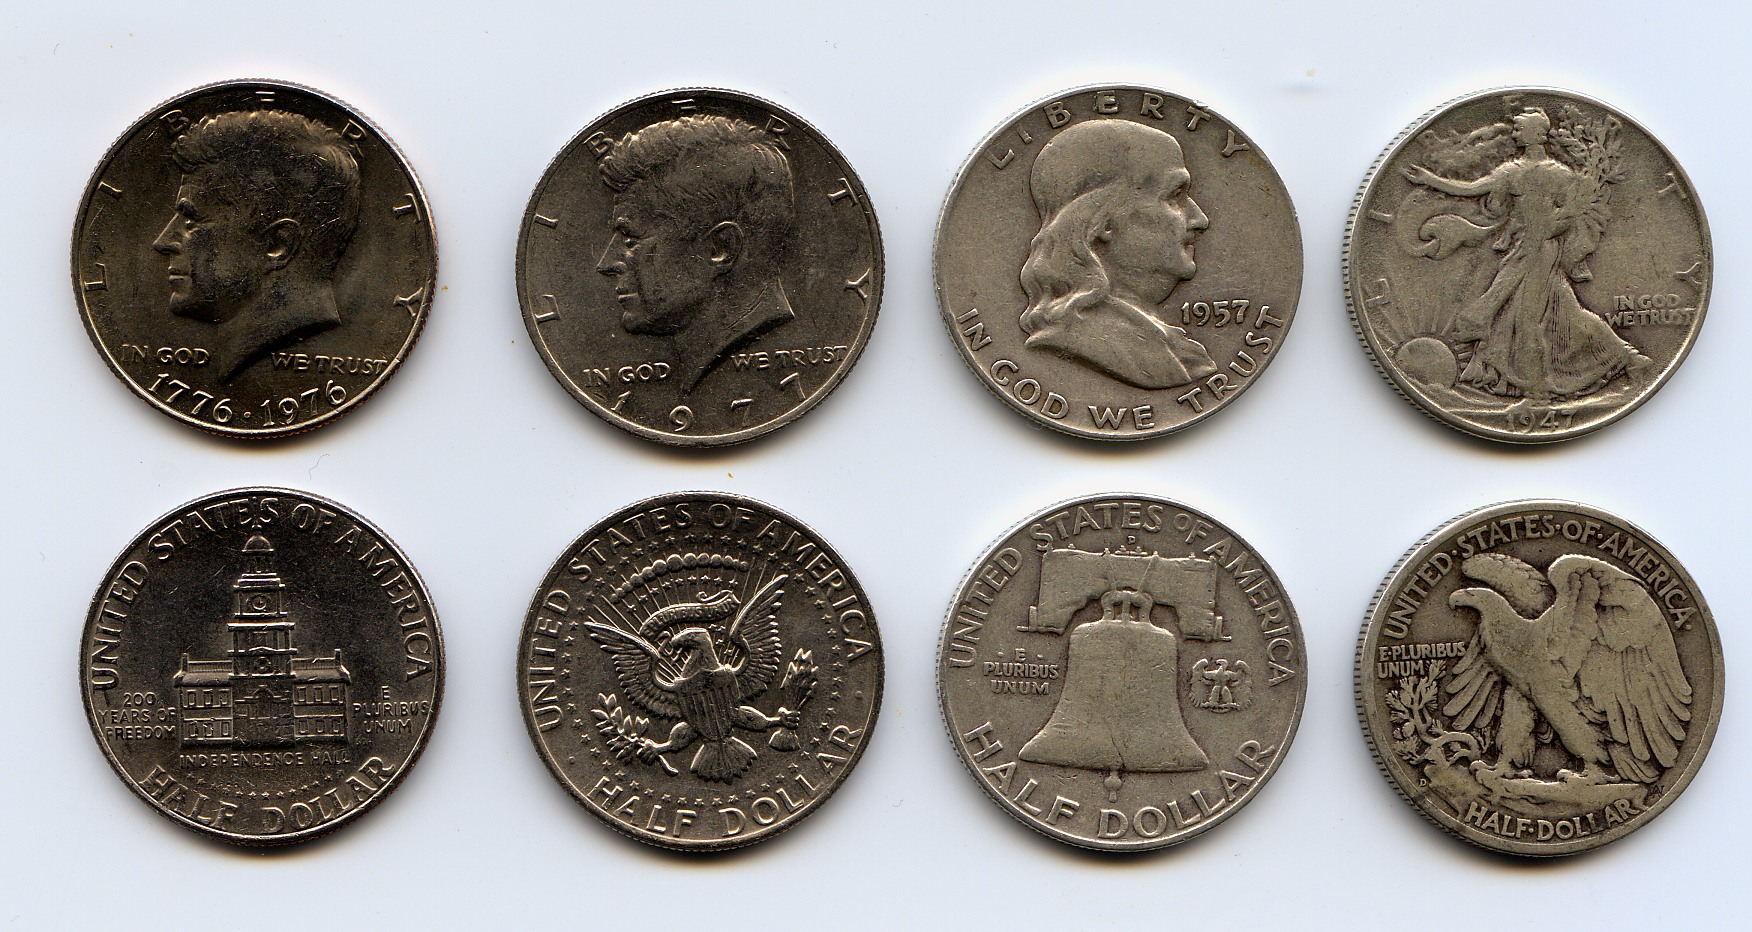 At 2.15 Millimeters, Which U.S. Coin Is The Thickest?